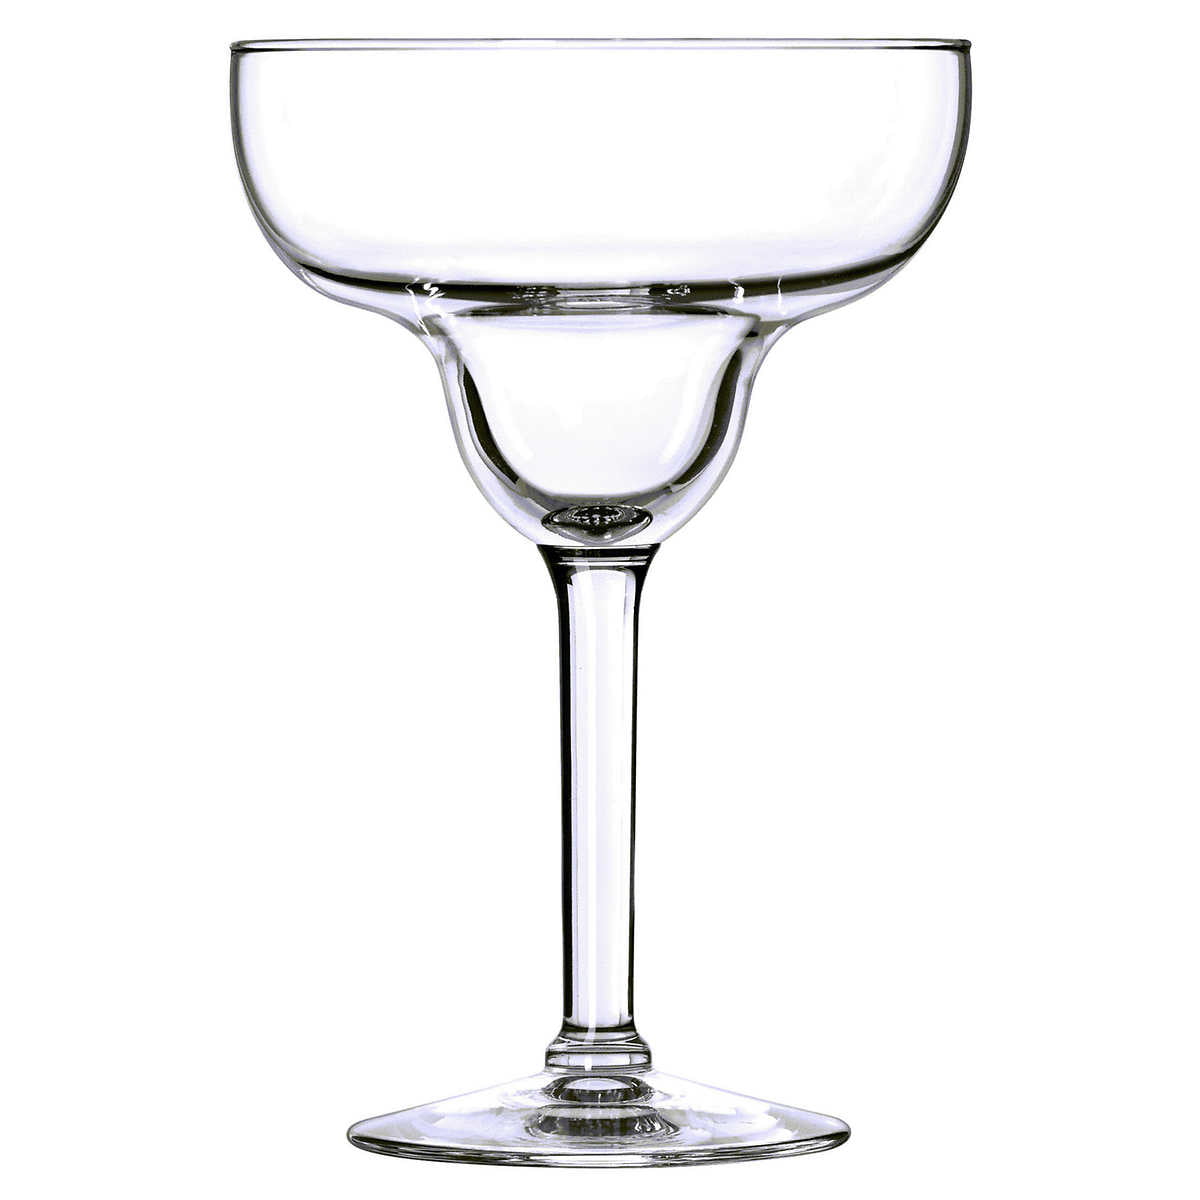 Libbey Glass Cocktail Shaker with Black Lid - 19.75 oz